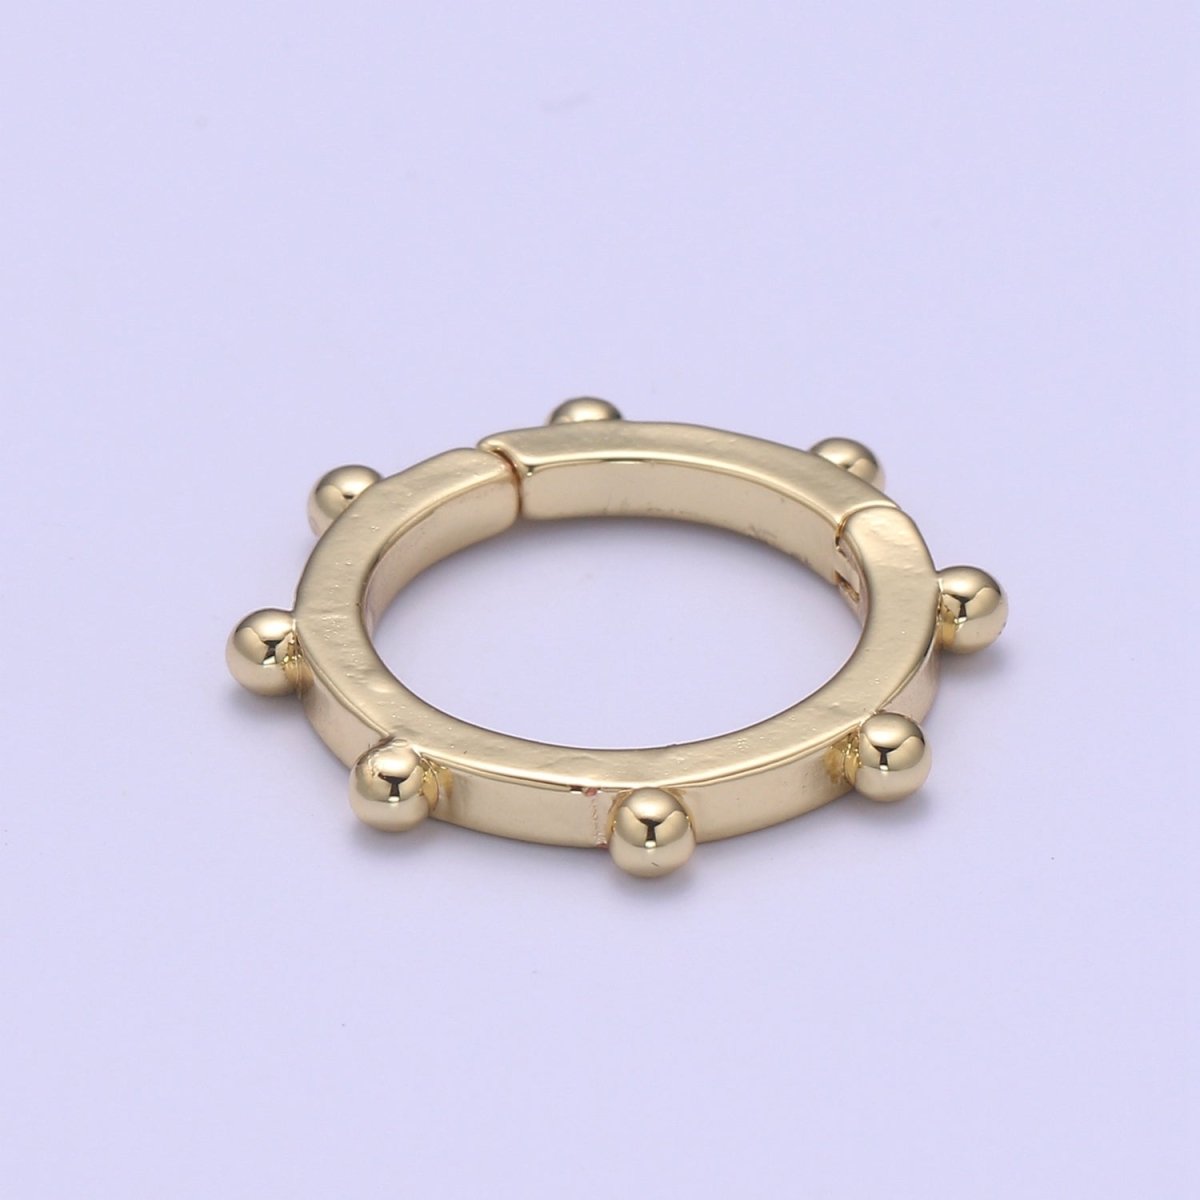 Nautical Gold Spring Gate Ring, 18 mm Ship Wheel Push Gate ring, Charm  Holder Clasp for Connector, Wristlet Holder L-275